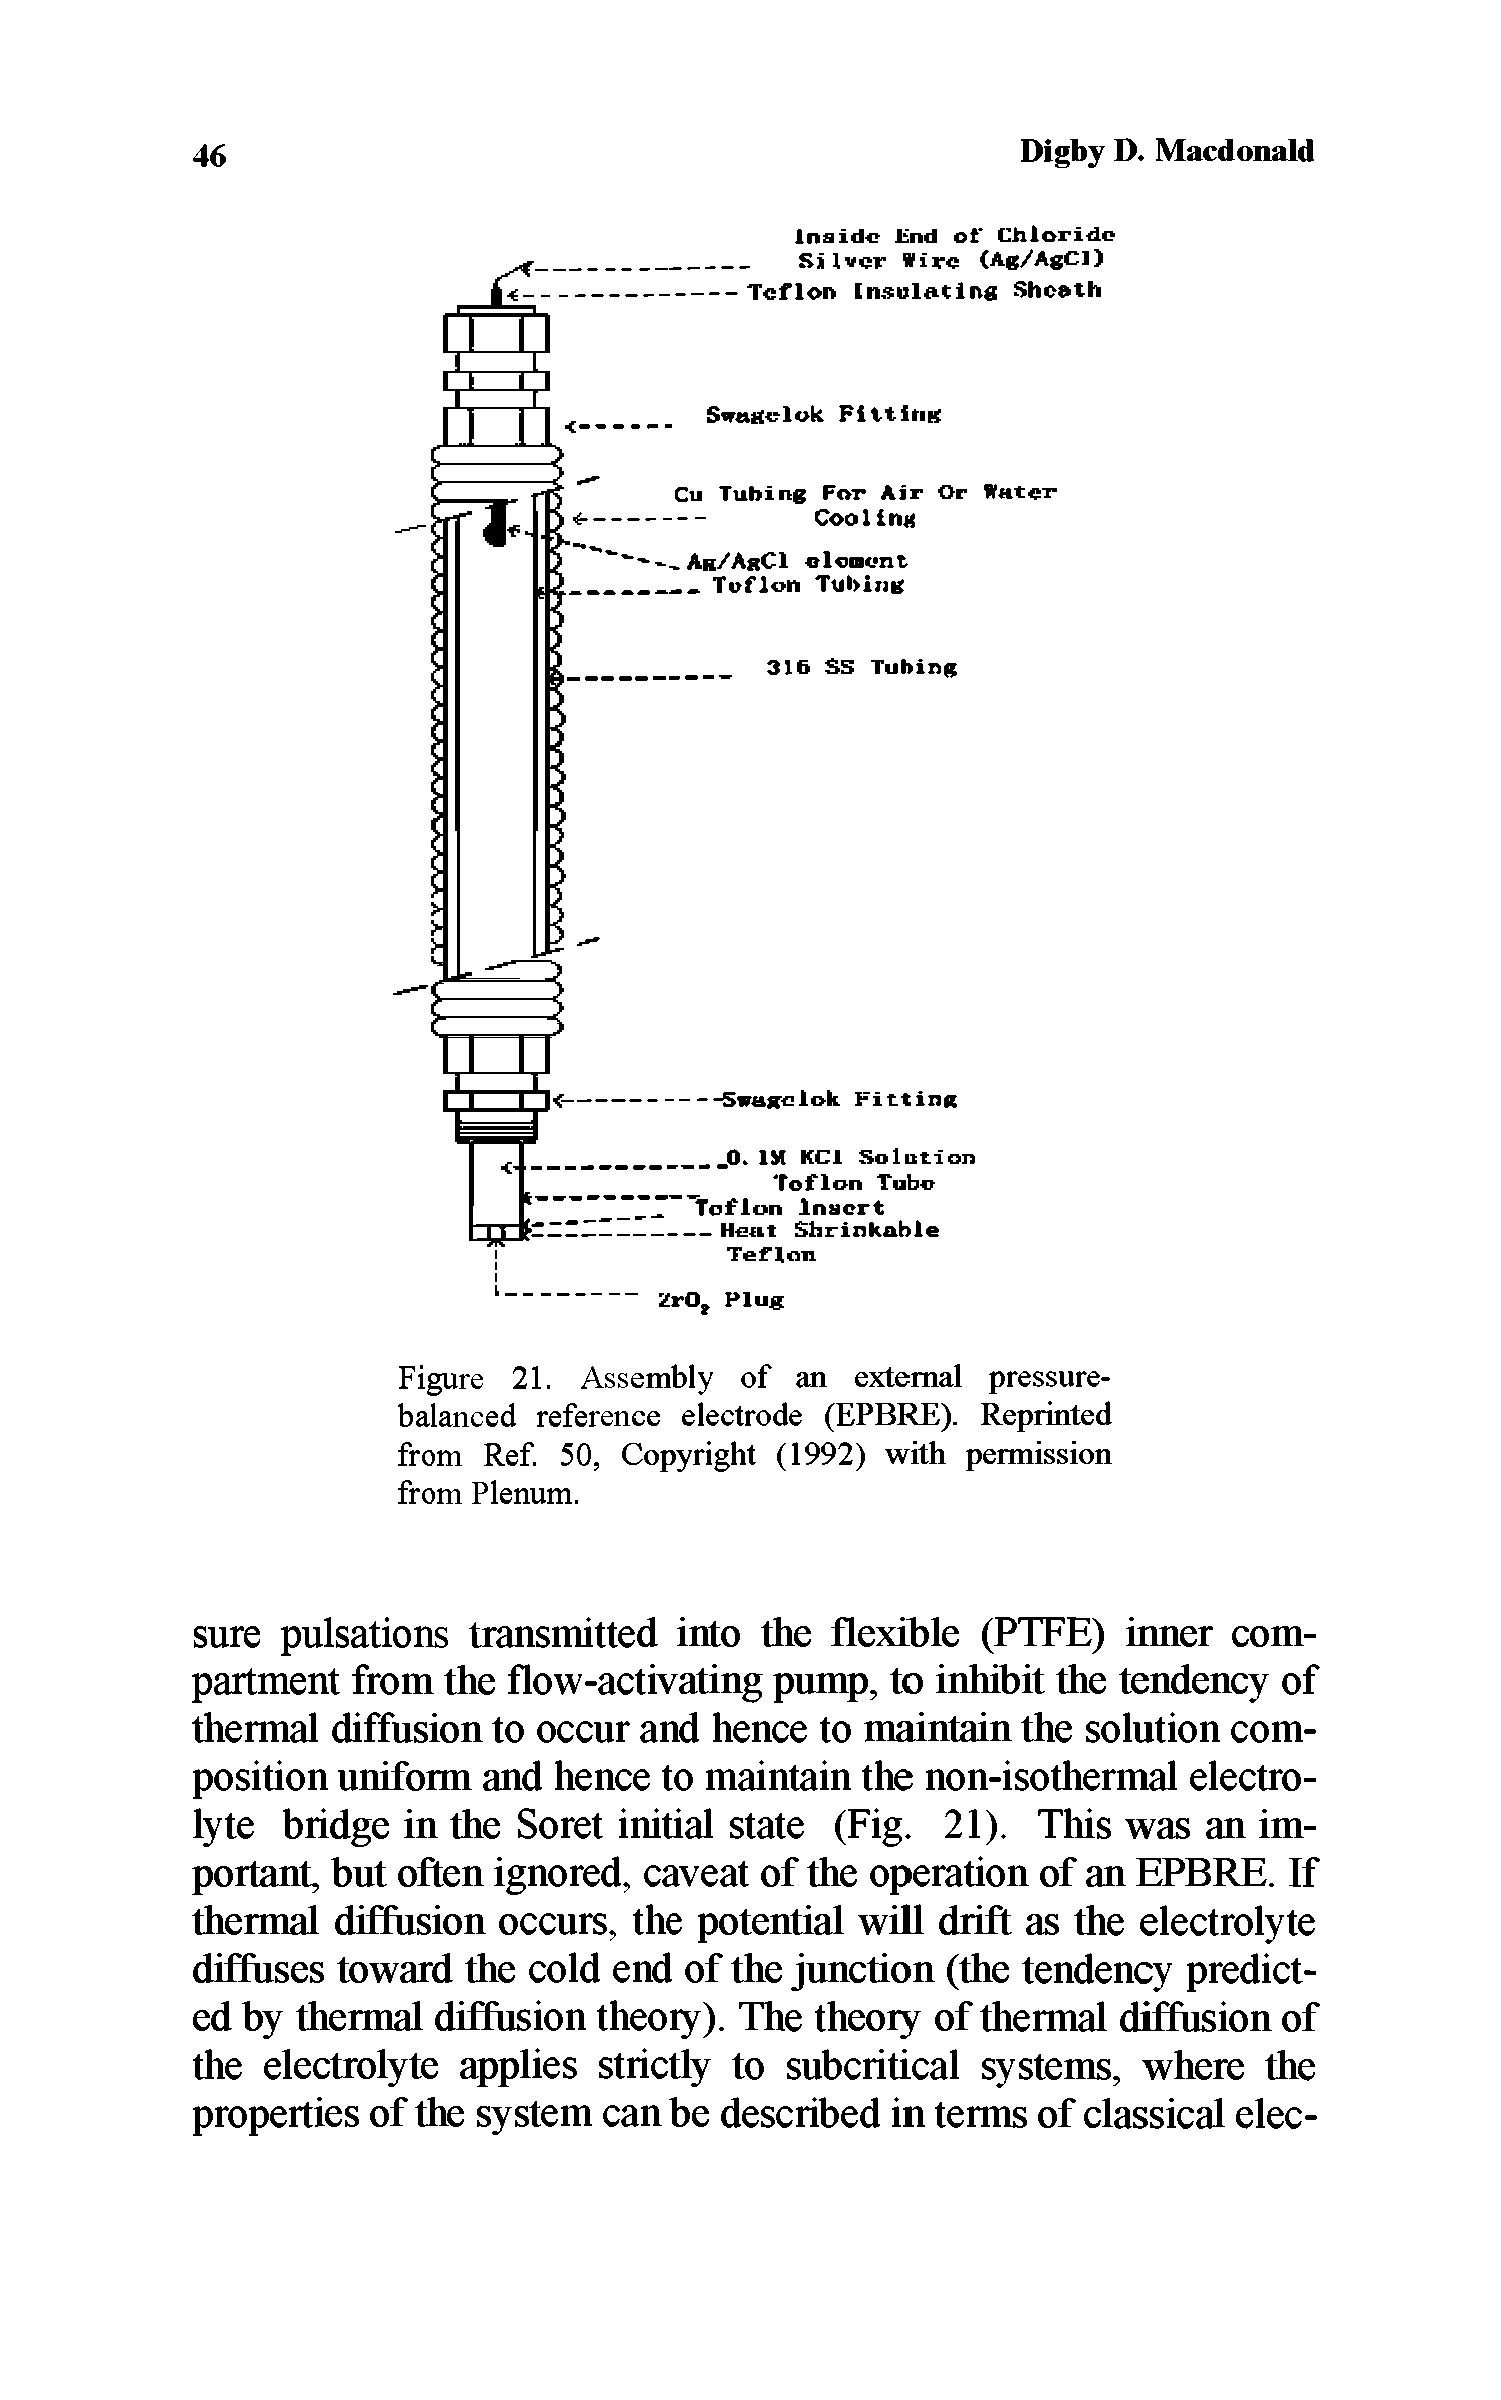 Figure 21. Assembly of an external pressure-balanced reference electrode (EPBRE). Reprinted from Ref. 50, Copyright (1992) with permission from Plenum.